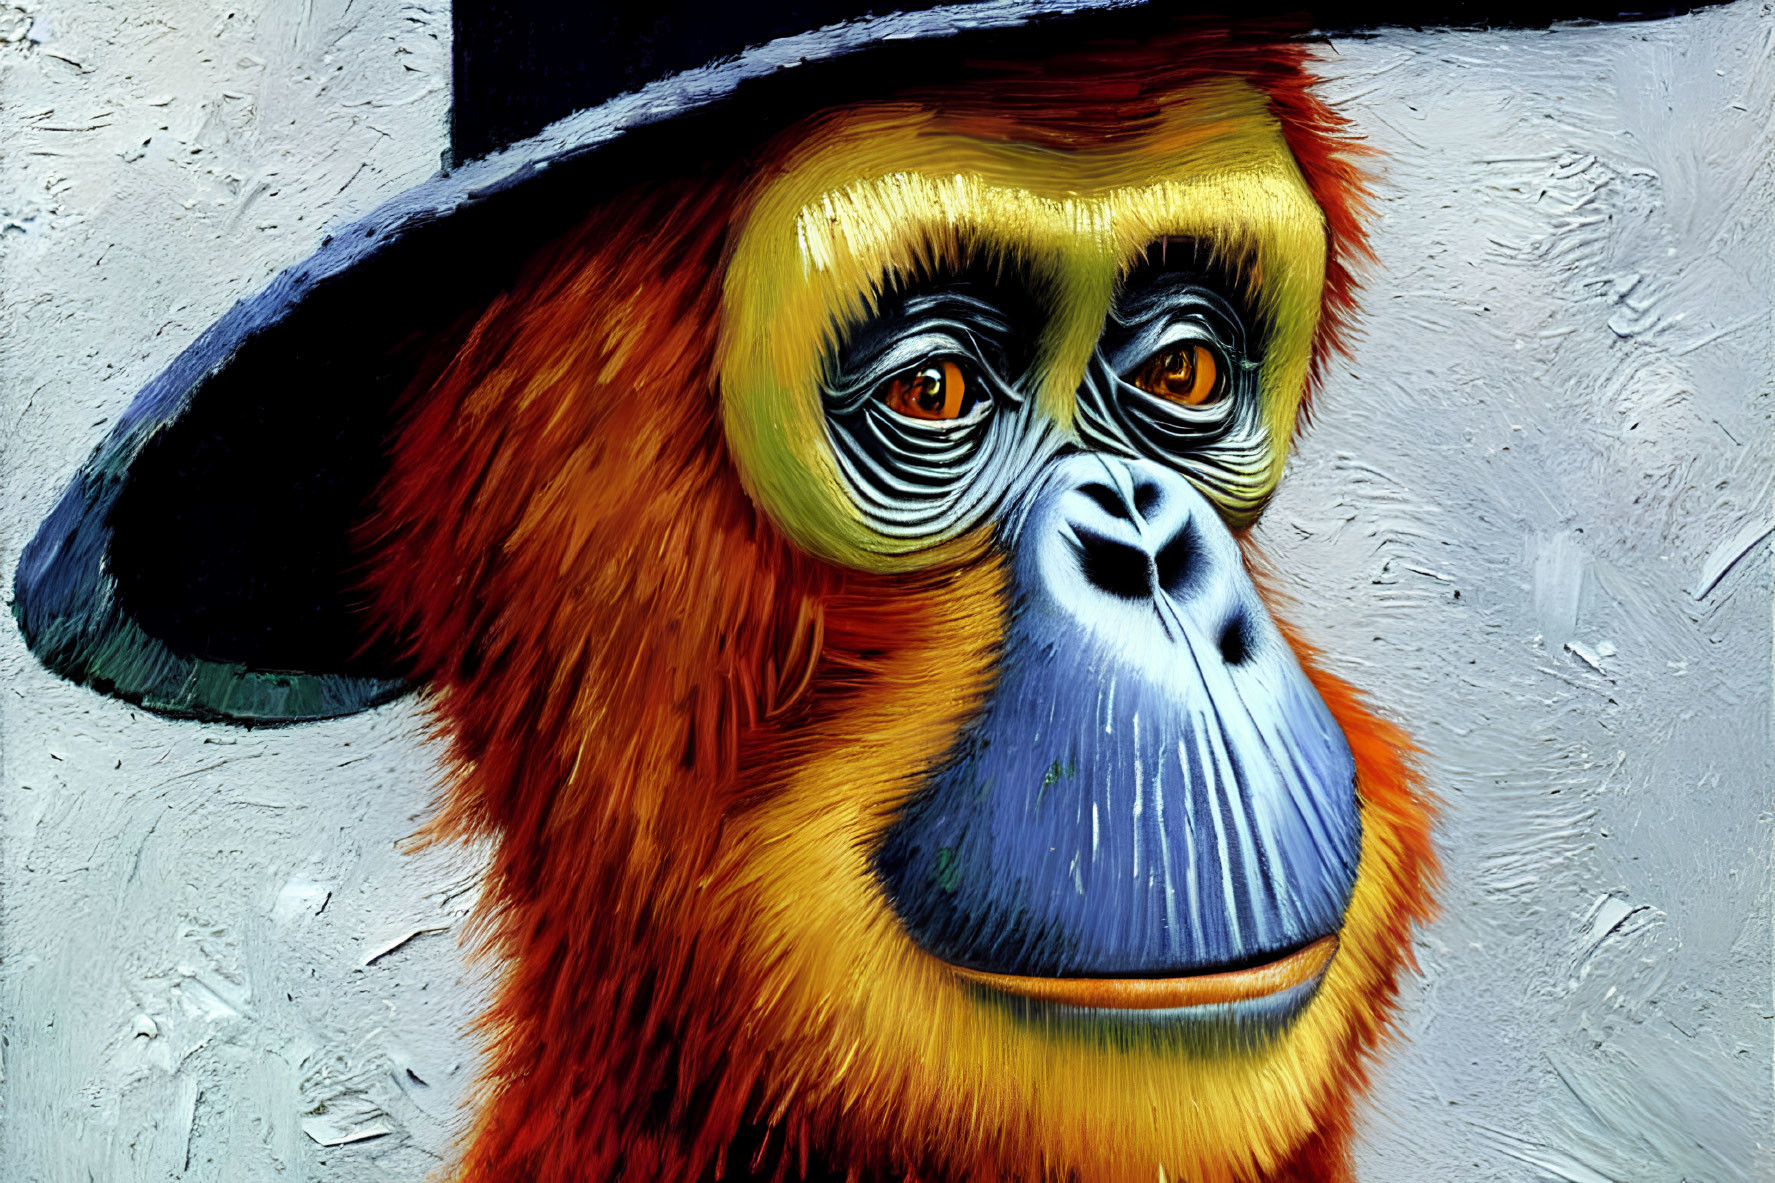 Vibrant painting of colorful monkey with blue face and black hat